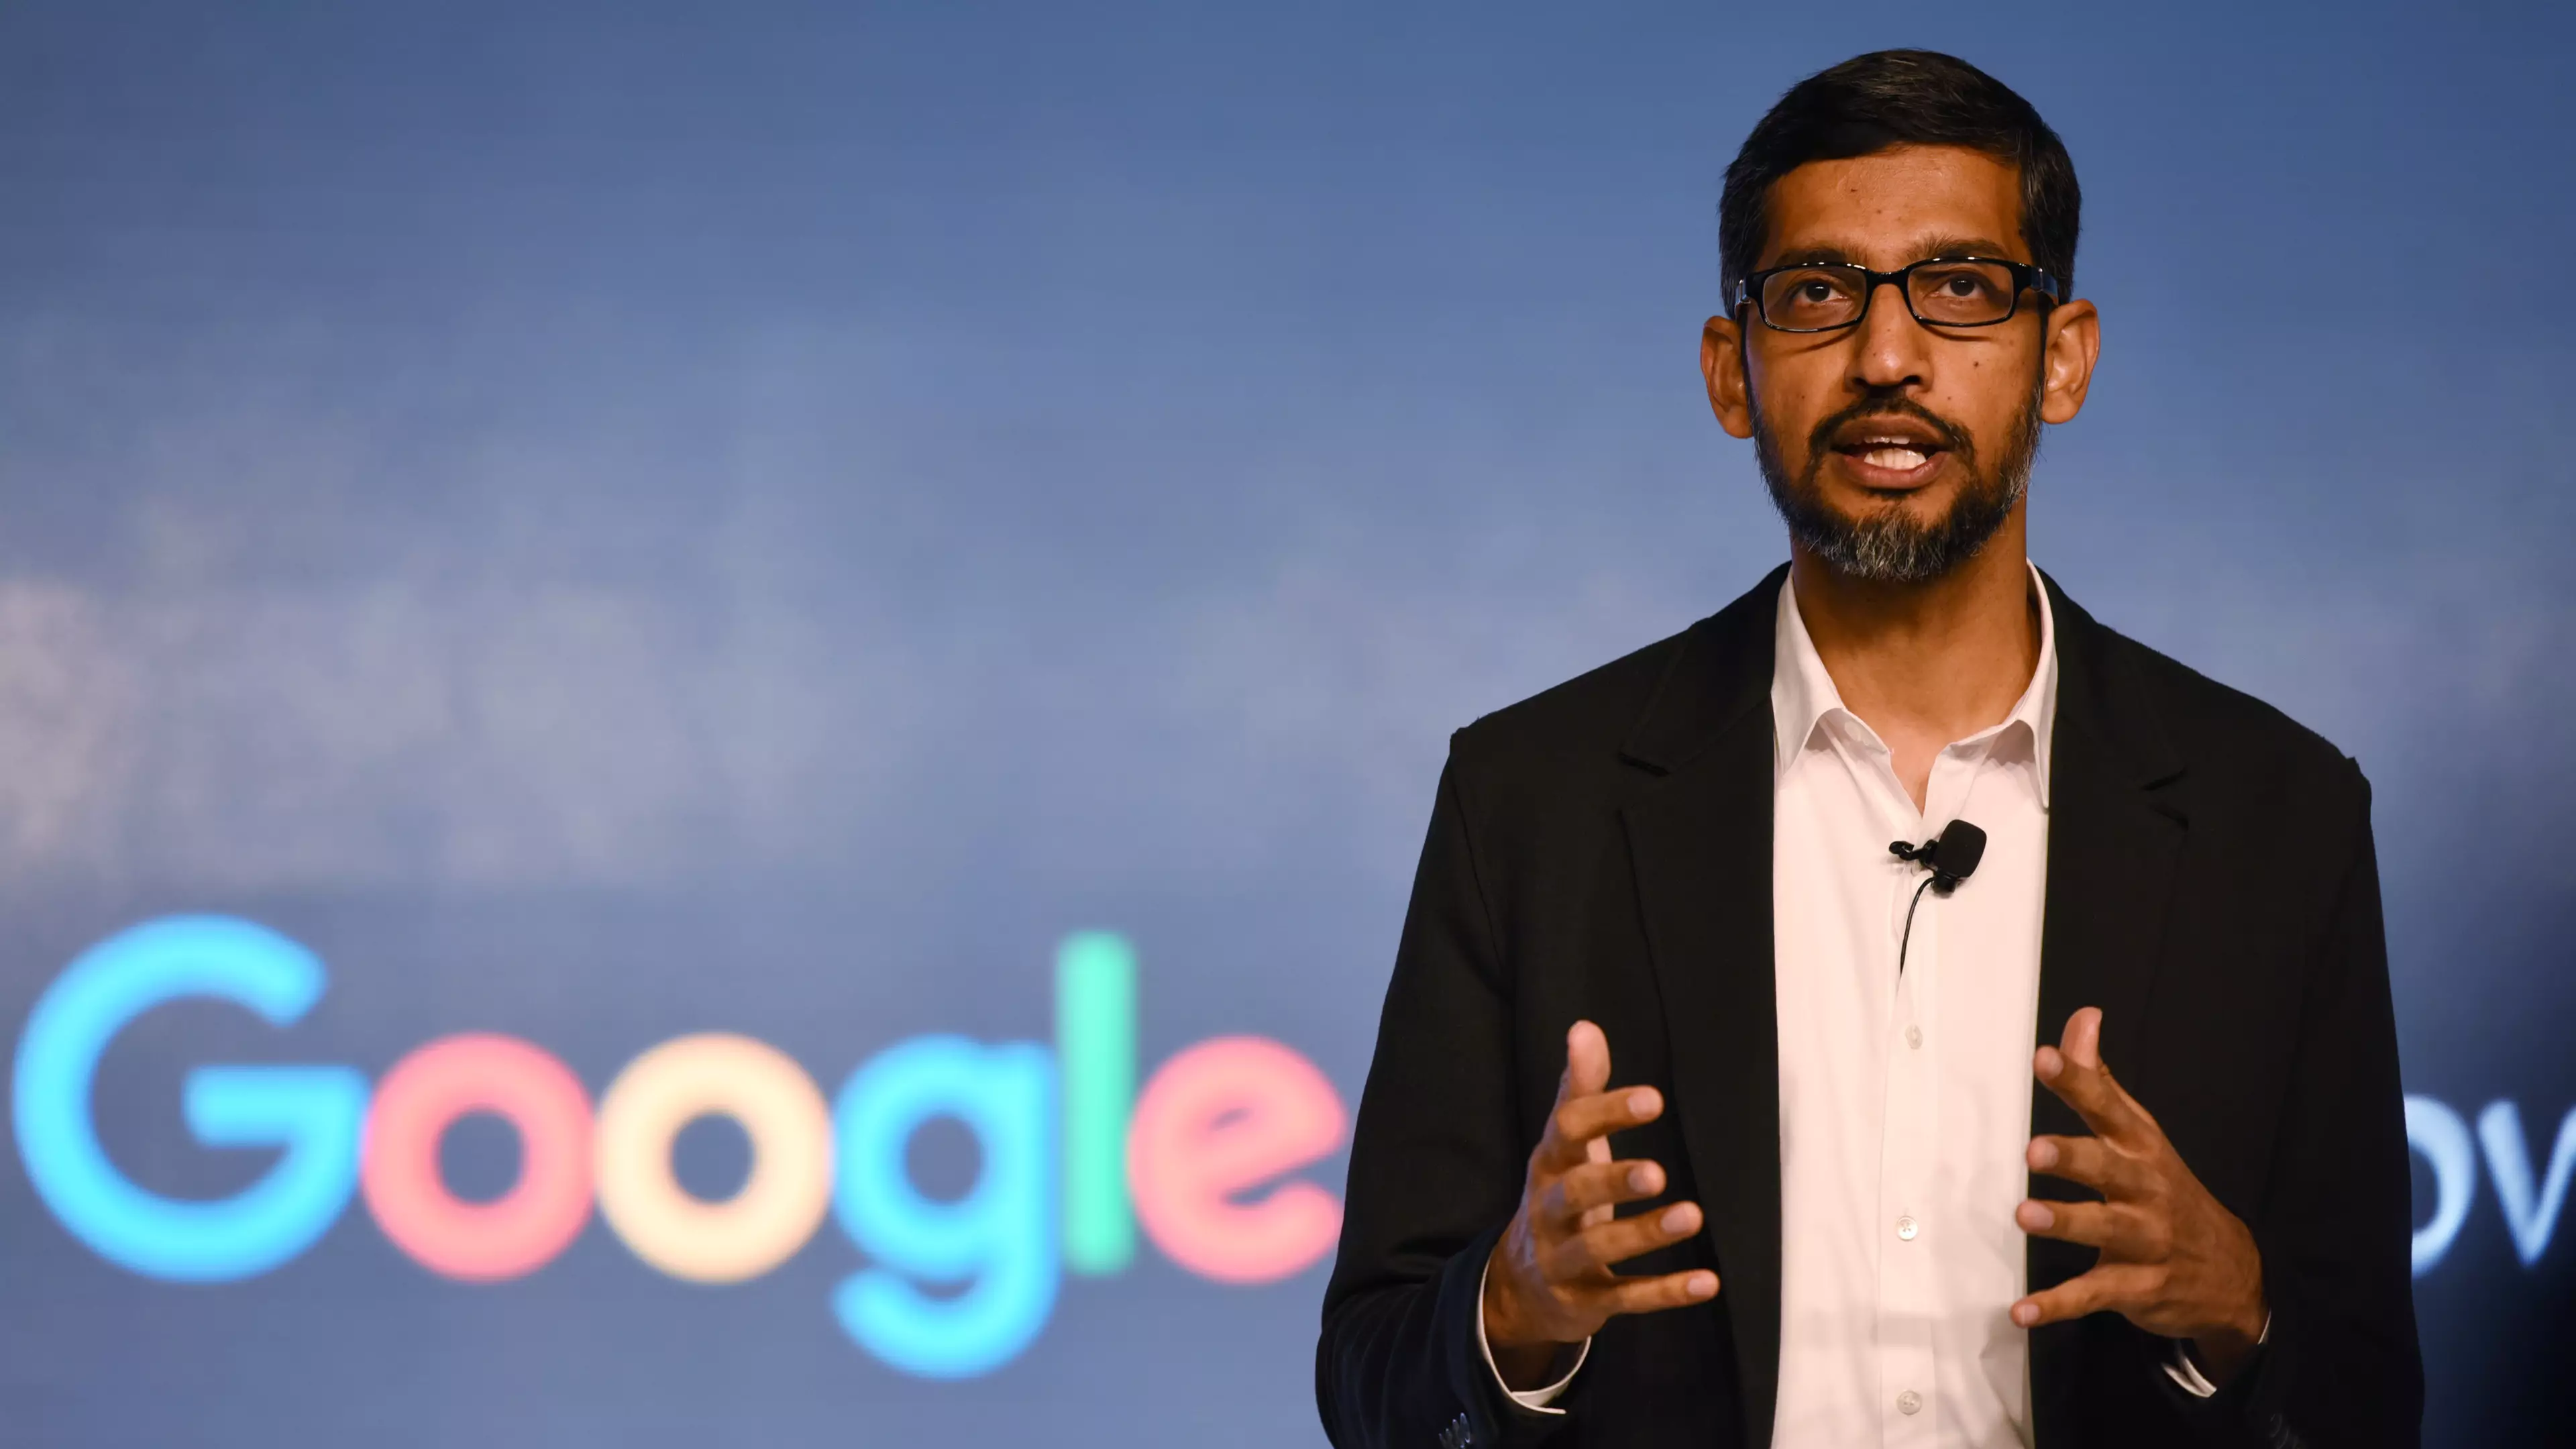 Google Tells Employees They Won't Need To Return To Office Until July 2021